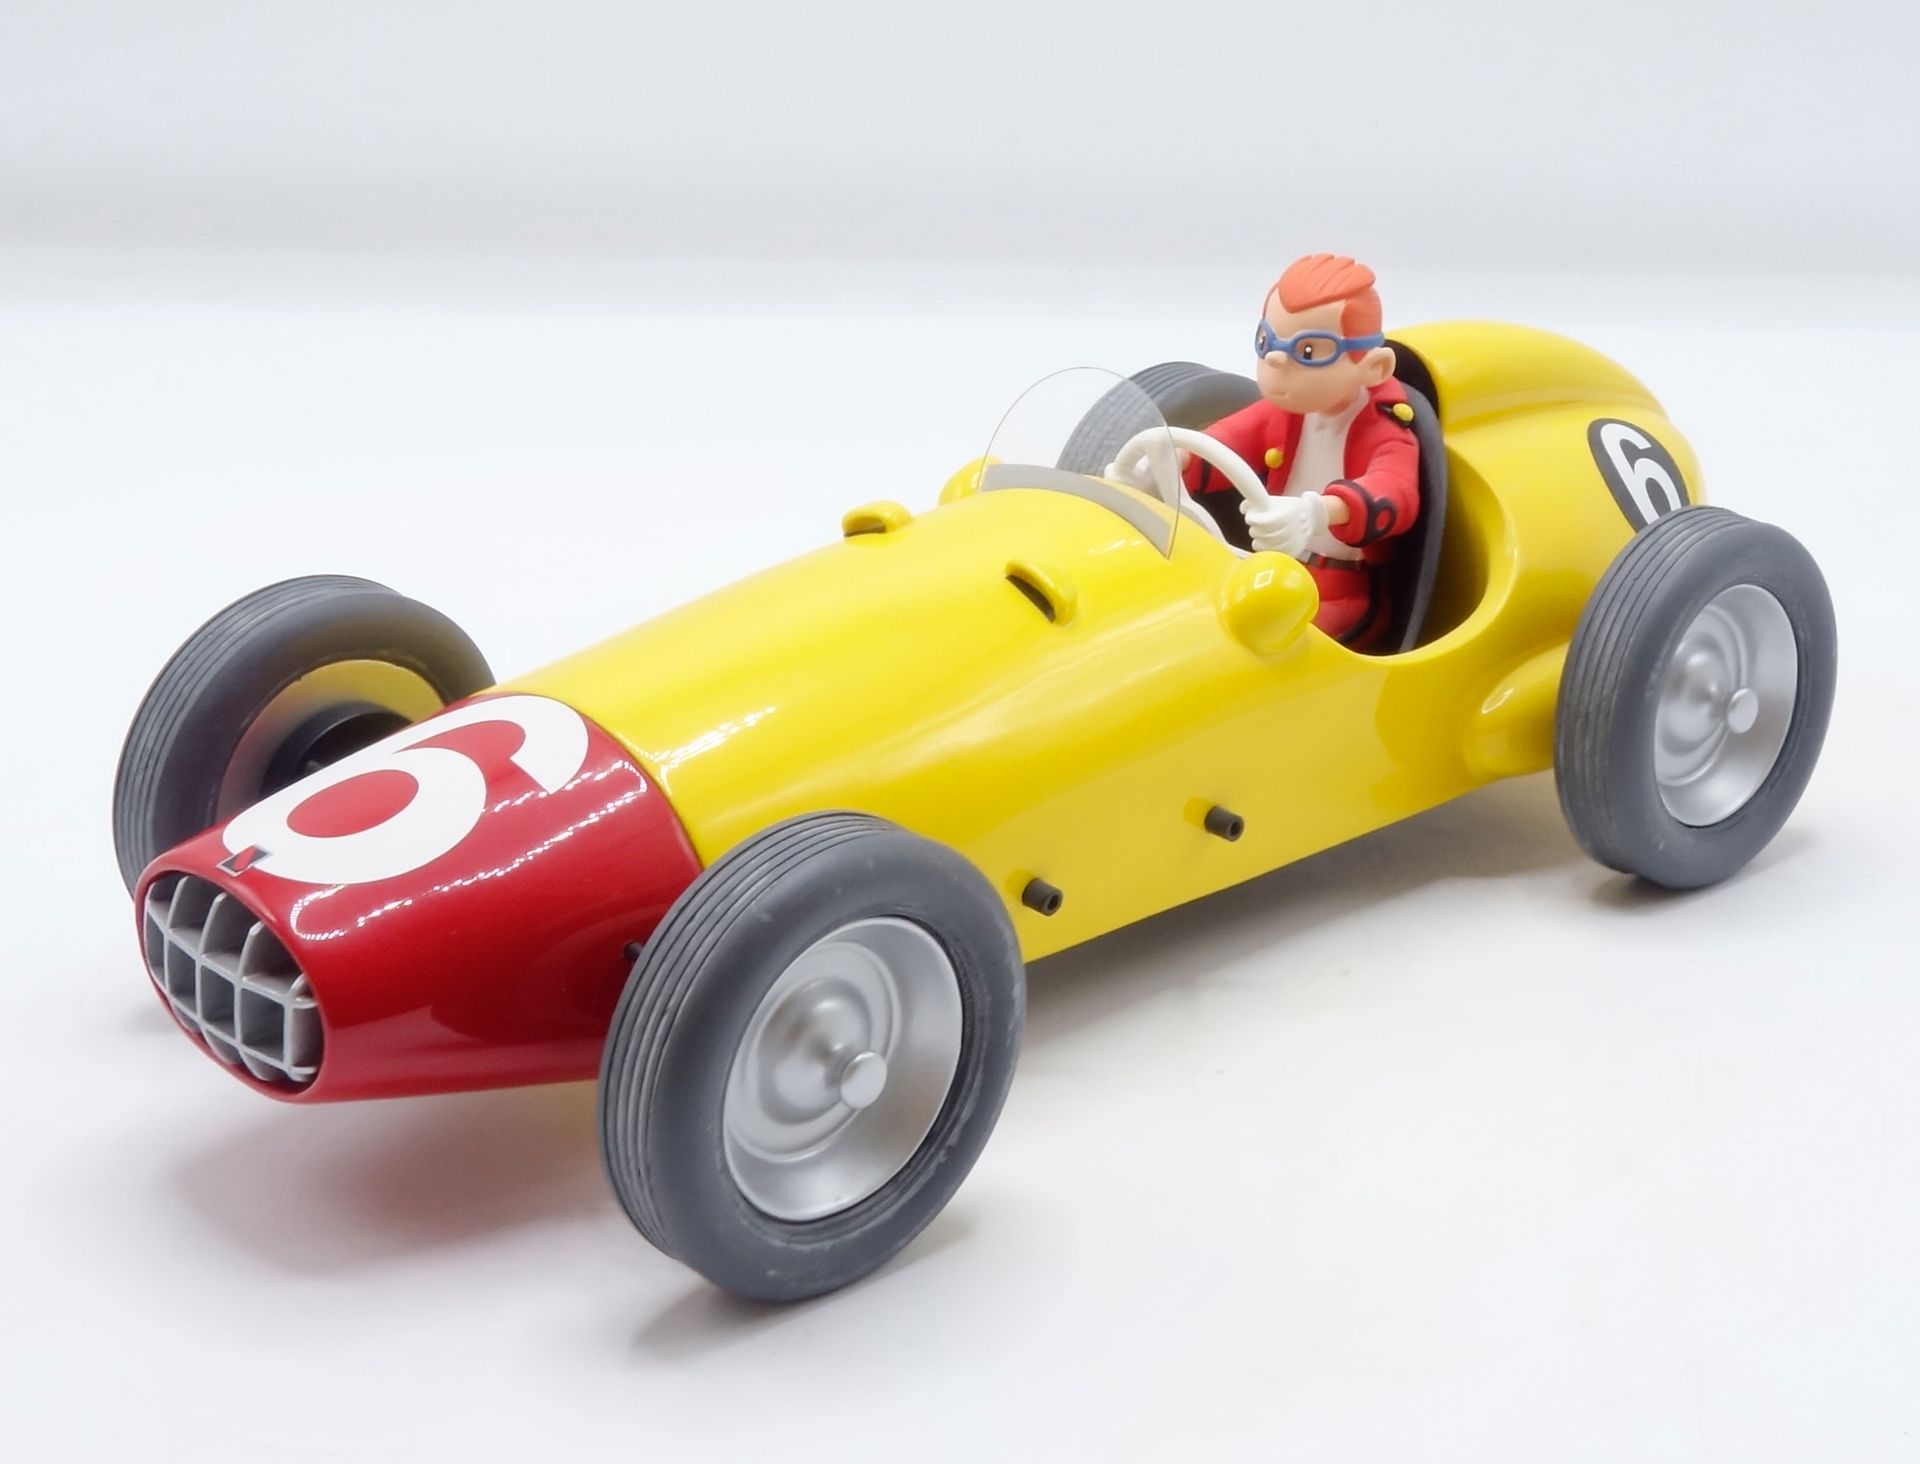 André FRANQUIN 
AROUTCHEFF : Spirou, the racing Turbo n°6 driven by Spirou (D146&hellip;